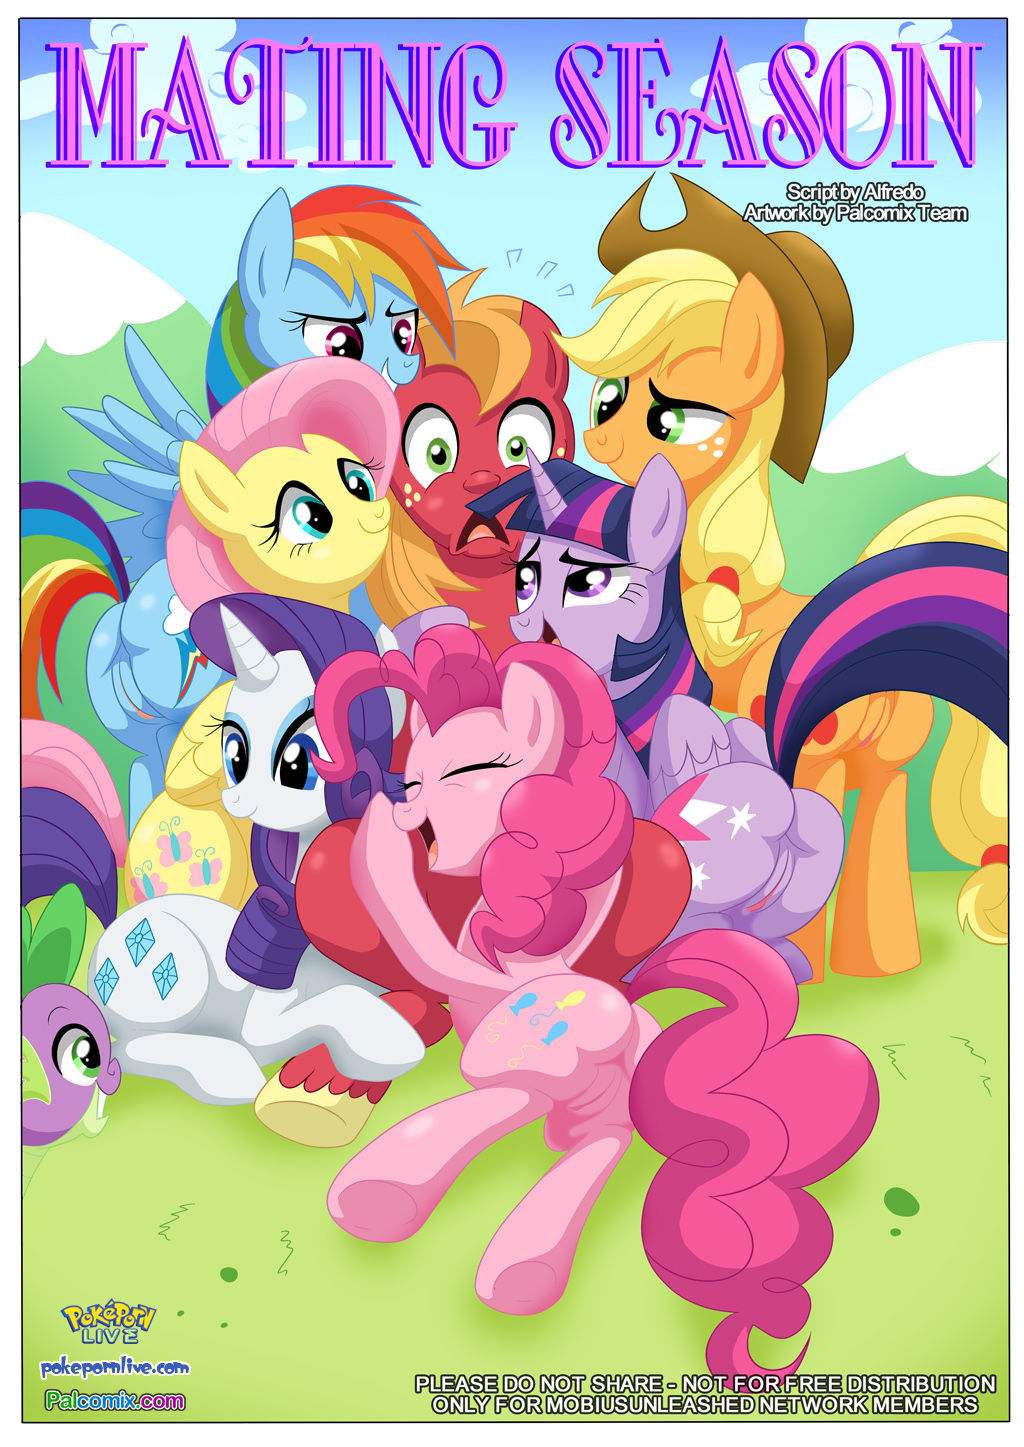 Mating Season - My Little Pony: Friendship is Magic by Palcomix